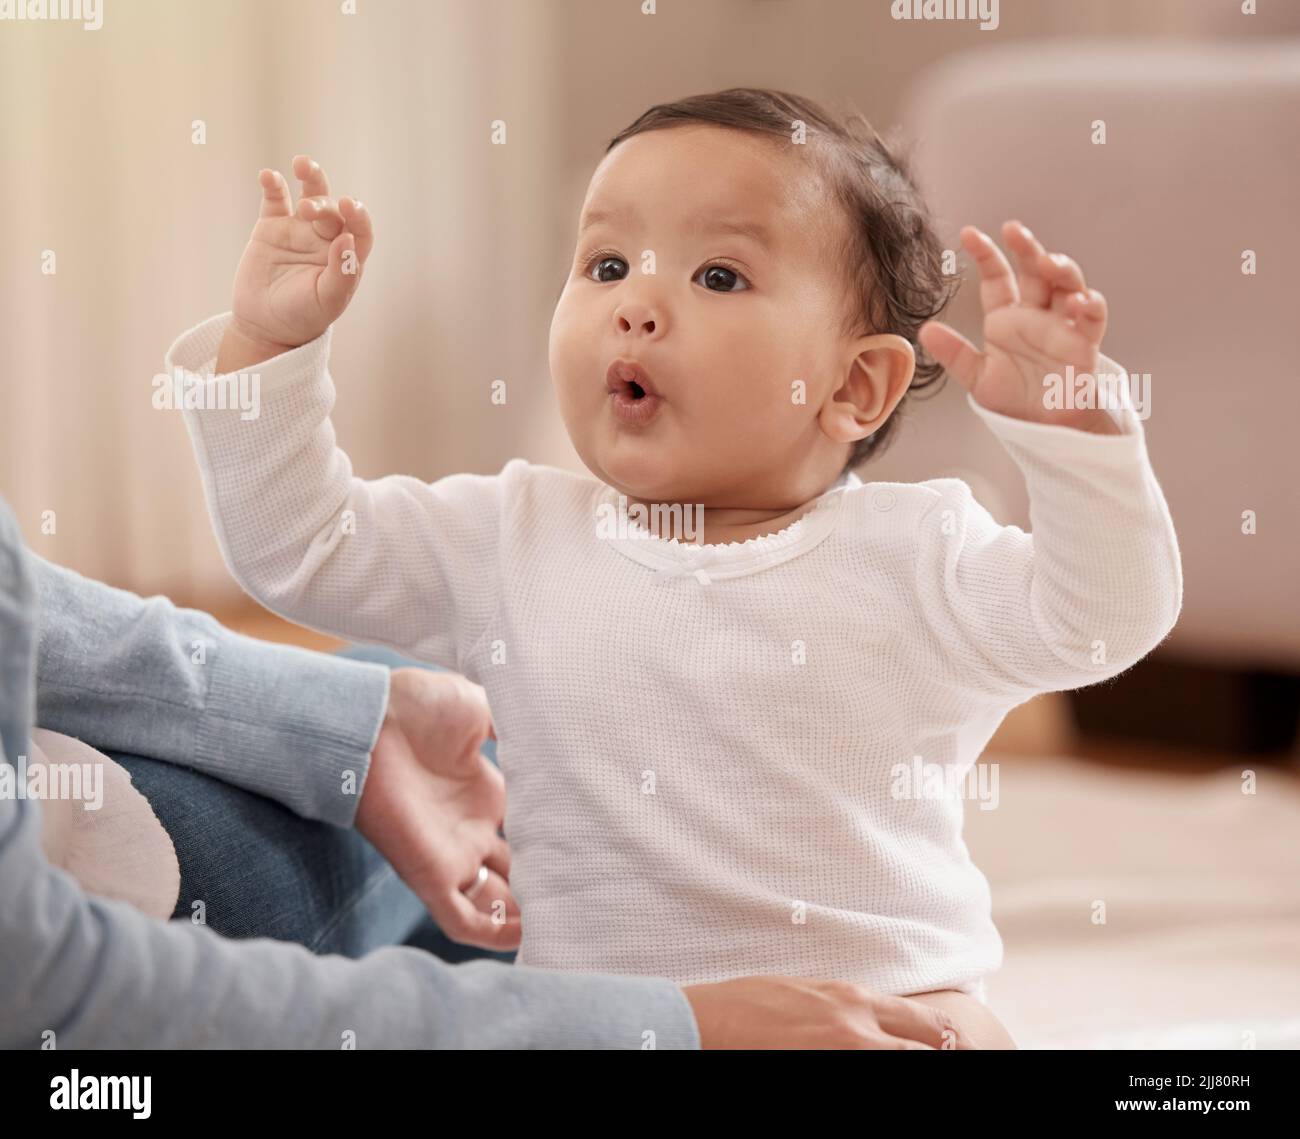 The beginning of a wonderfully big personality. an adorable baby girl sharing a playful moment with her mother at home. Stock Photo